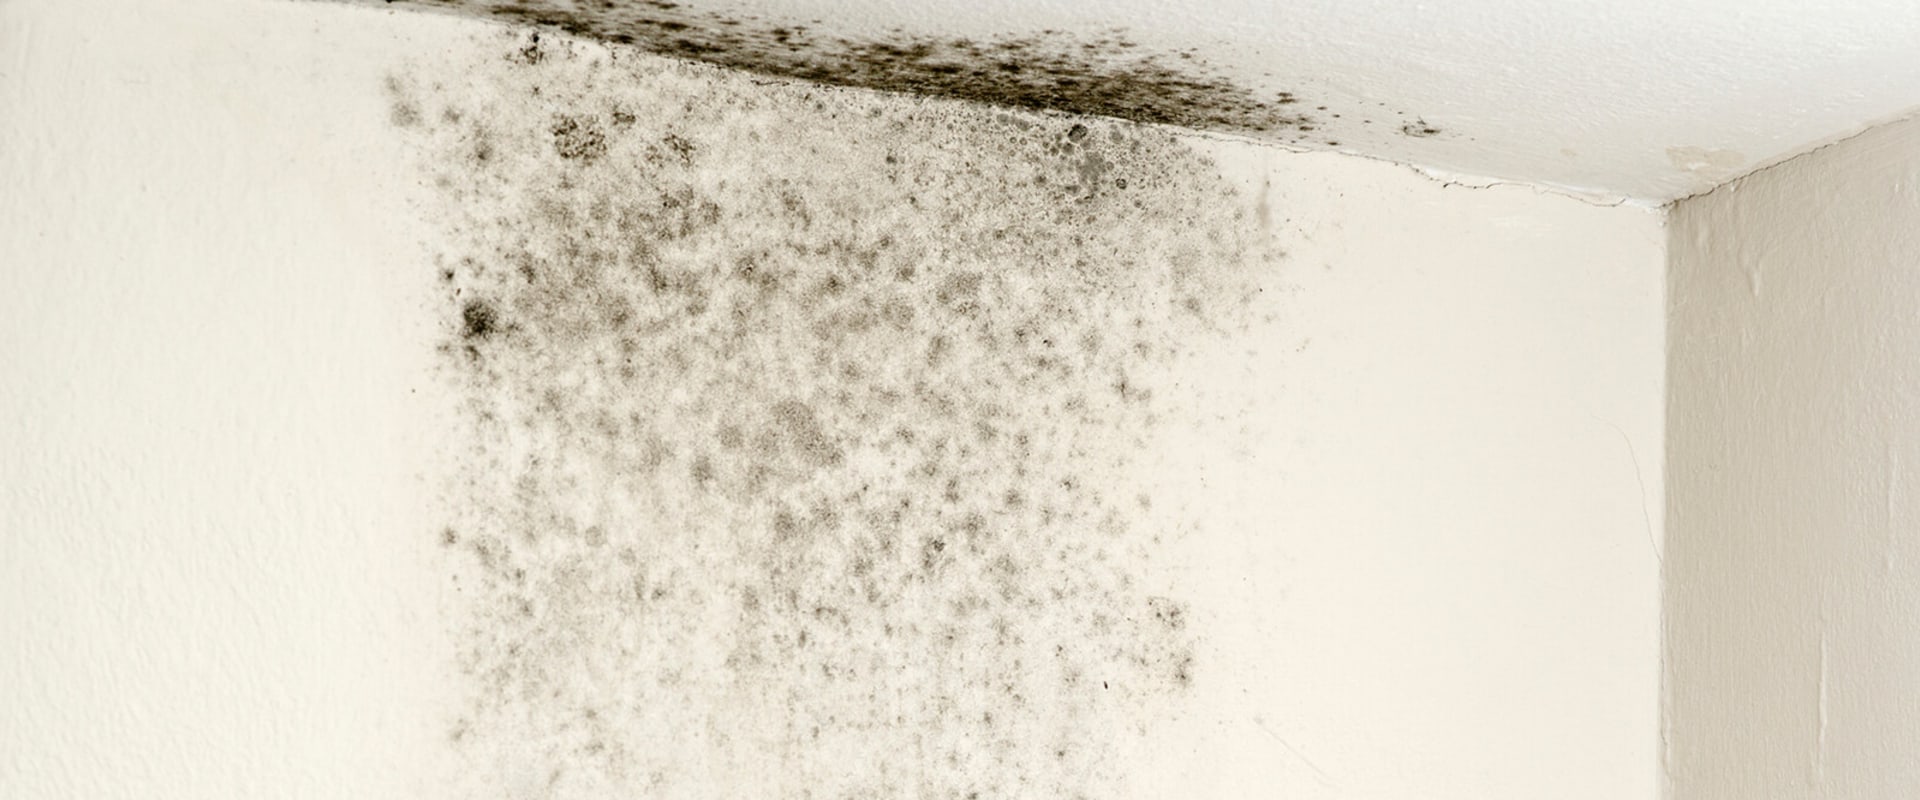 What do professionals use to clean black mold?